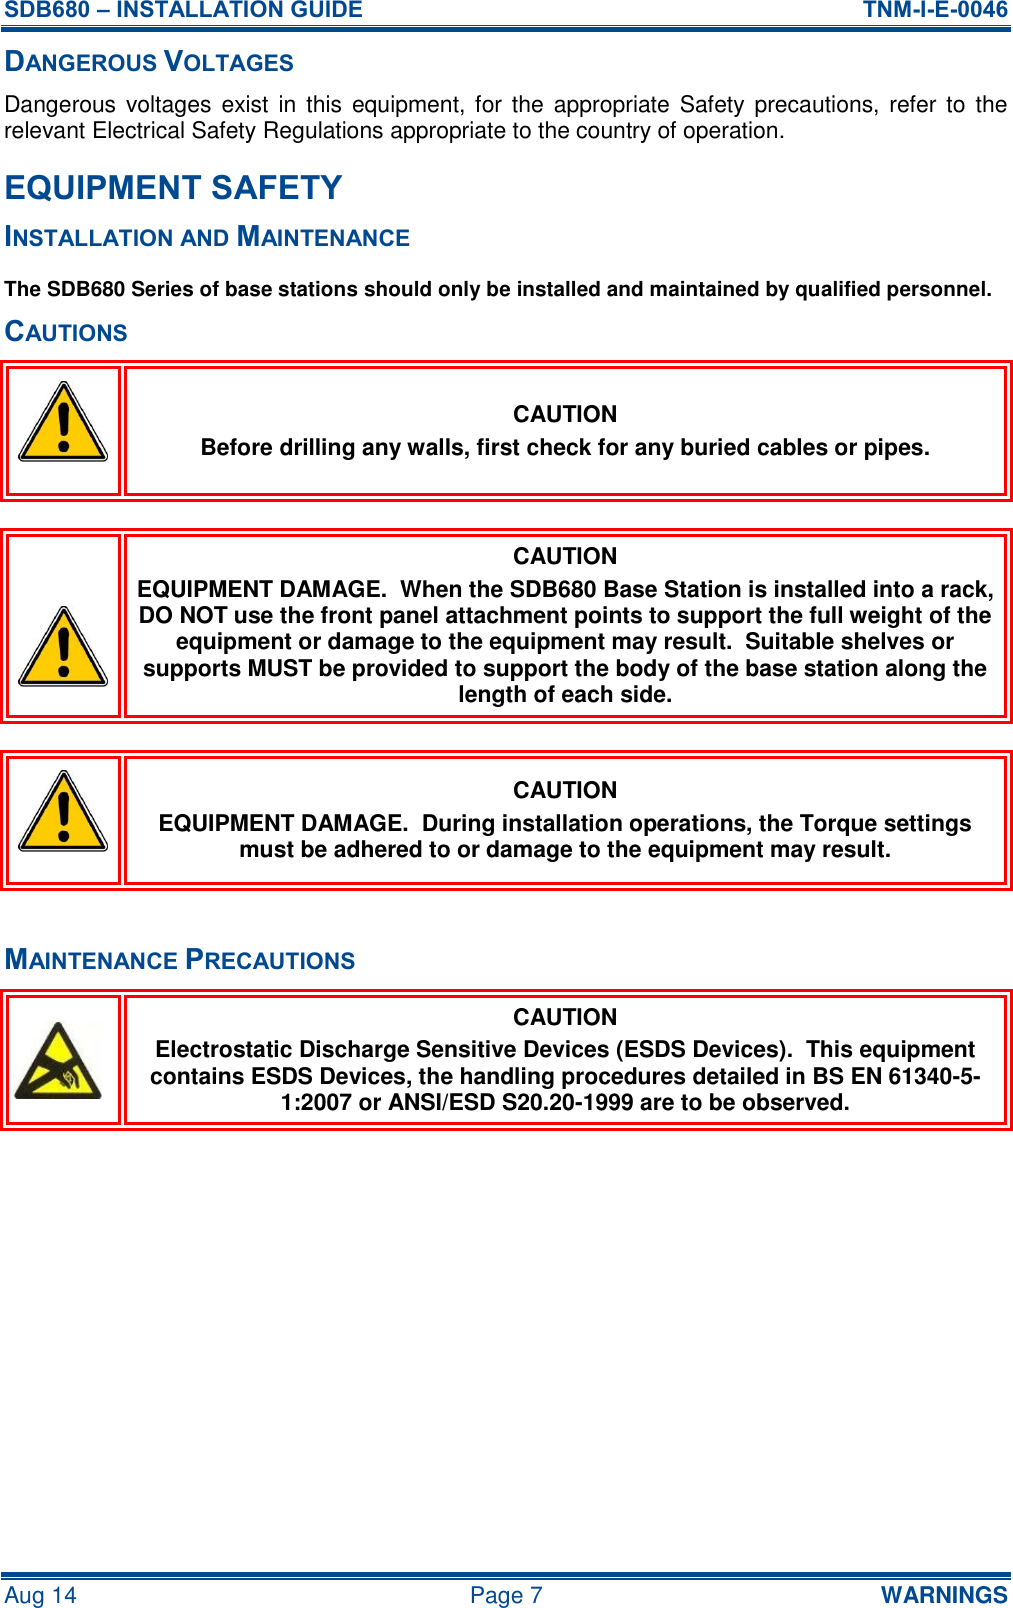 SDB680 – INSTALLATION GUIDE  TNM-I-E-0046 Aug 14  Page 7  WARNINGS DANGEROUS VOLTAGES Dangerous voltages exist in  this equipment, for the  appropriate  Safety  precautions,  refer  to  the relevant Electrical Safety Regulations appropriate to the country of operation. EQUIPMENT SAFETY INSTALLATION AND MAINTENANCE The SDB680 Series of base stations should only be installed and maintained by qualified personnel. CAUTIONS  CAUTION Before drilling any walls, first check for any buried cables or pipes.   CAUTION EQUIPMENT DAMAGE.  When the SDB680 Base Station is installed into a rack, DO NOT use the front panel attachment points to support the full weight of the equipment or damage to the equipment may result.  Suitable shelves or supports MUST be provided to support the body of the base station along the length of each side.   CAUTION EQUIPMENT DAMAGE.  During installation operations, the Torque settings must be adhered to or damage to the equipment may result.  MAINTENANCE PRECAUTIONS  CAUTION Electrostatic Discharge Sensitive Devices (ESDS Devices).  This equipment contains ESDS Devices, the handling procedures detailed in BS EN 61340-5-1:2007 or ANSI/ESD S20.20-1999 are to be observed.    